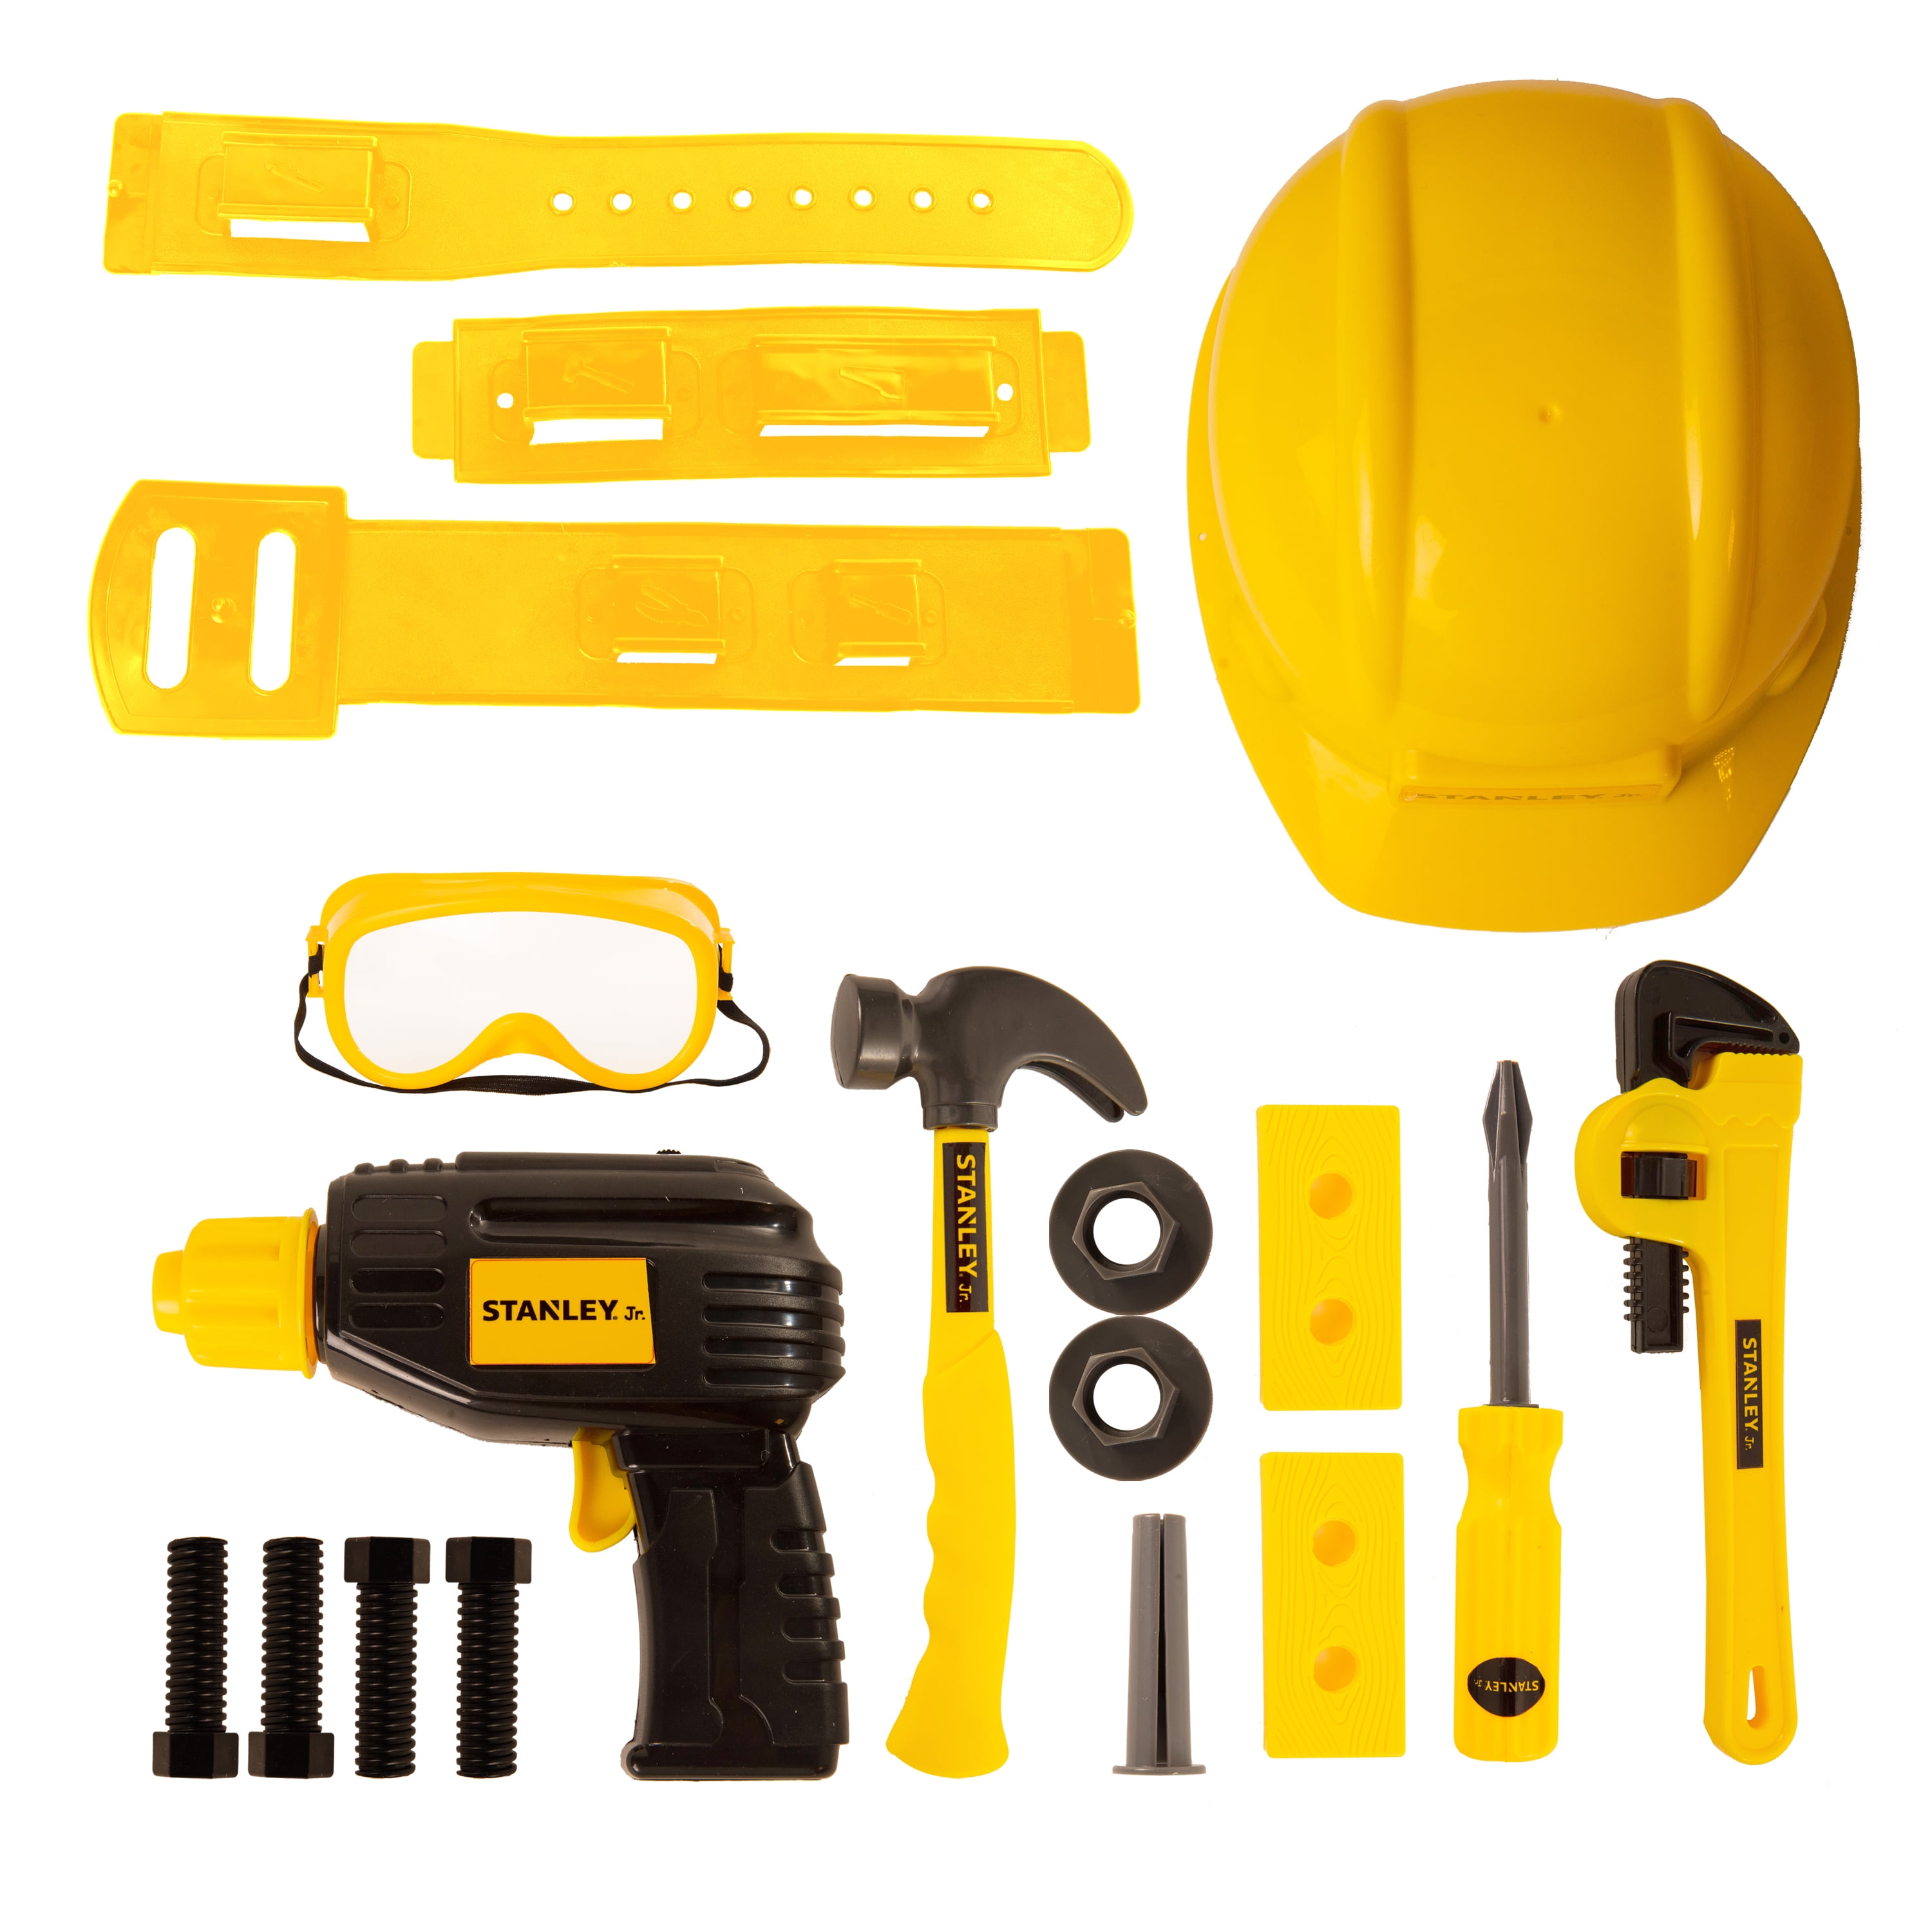 Stanley Jr. Mega Kids Roleplay Toolbox & Toy Tool Set w/Power Drill 